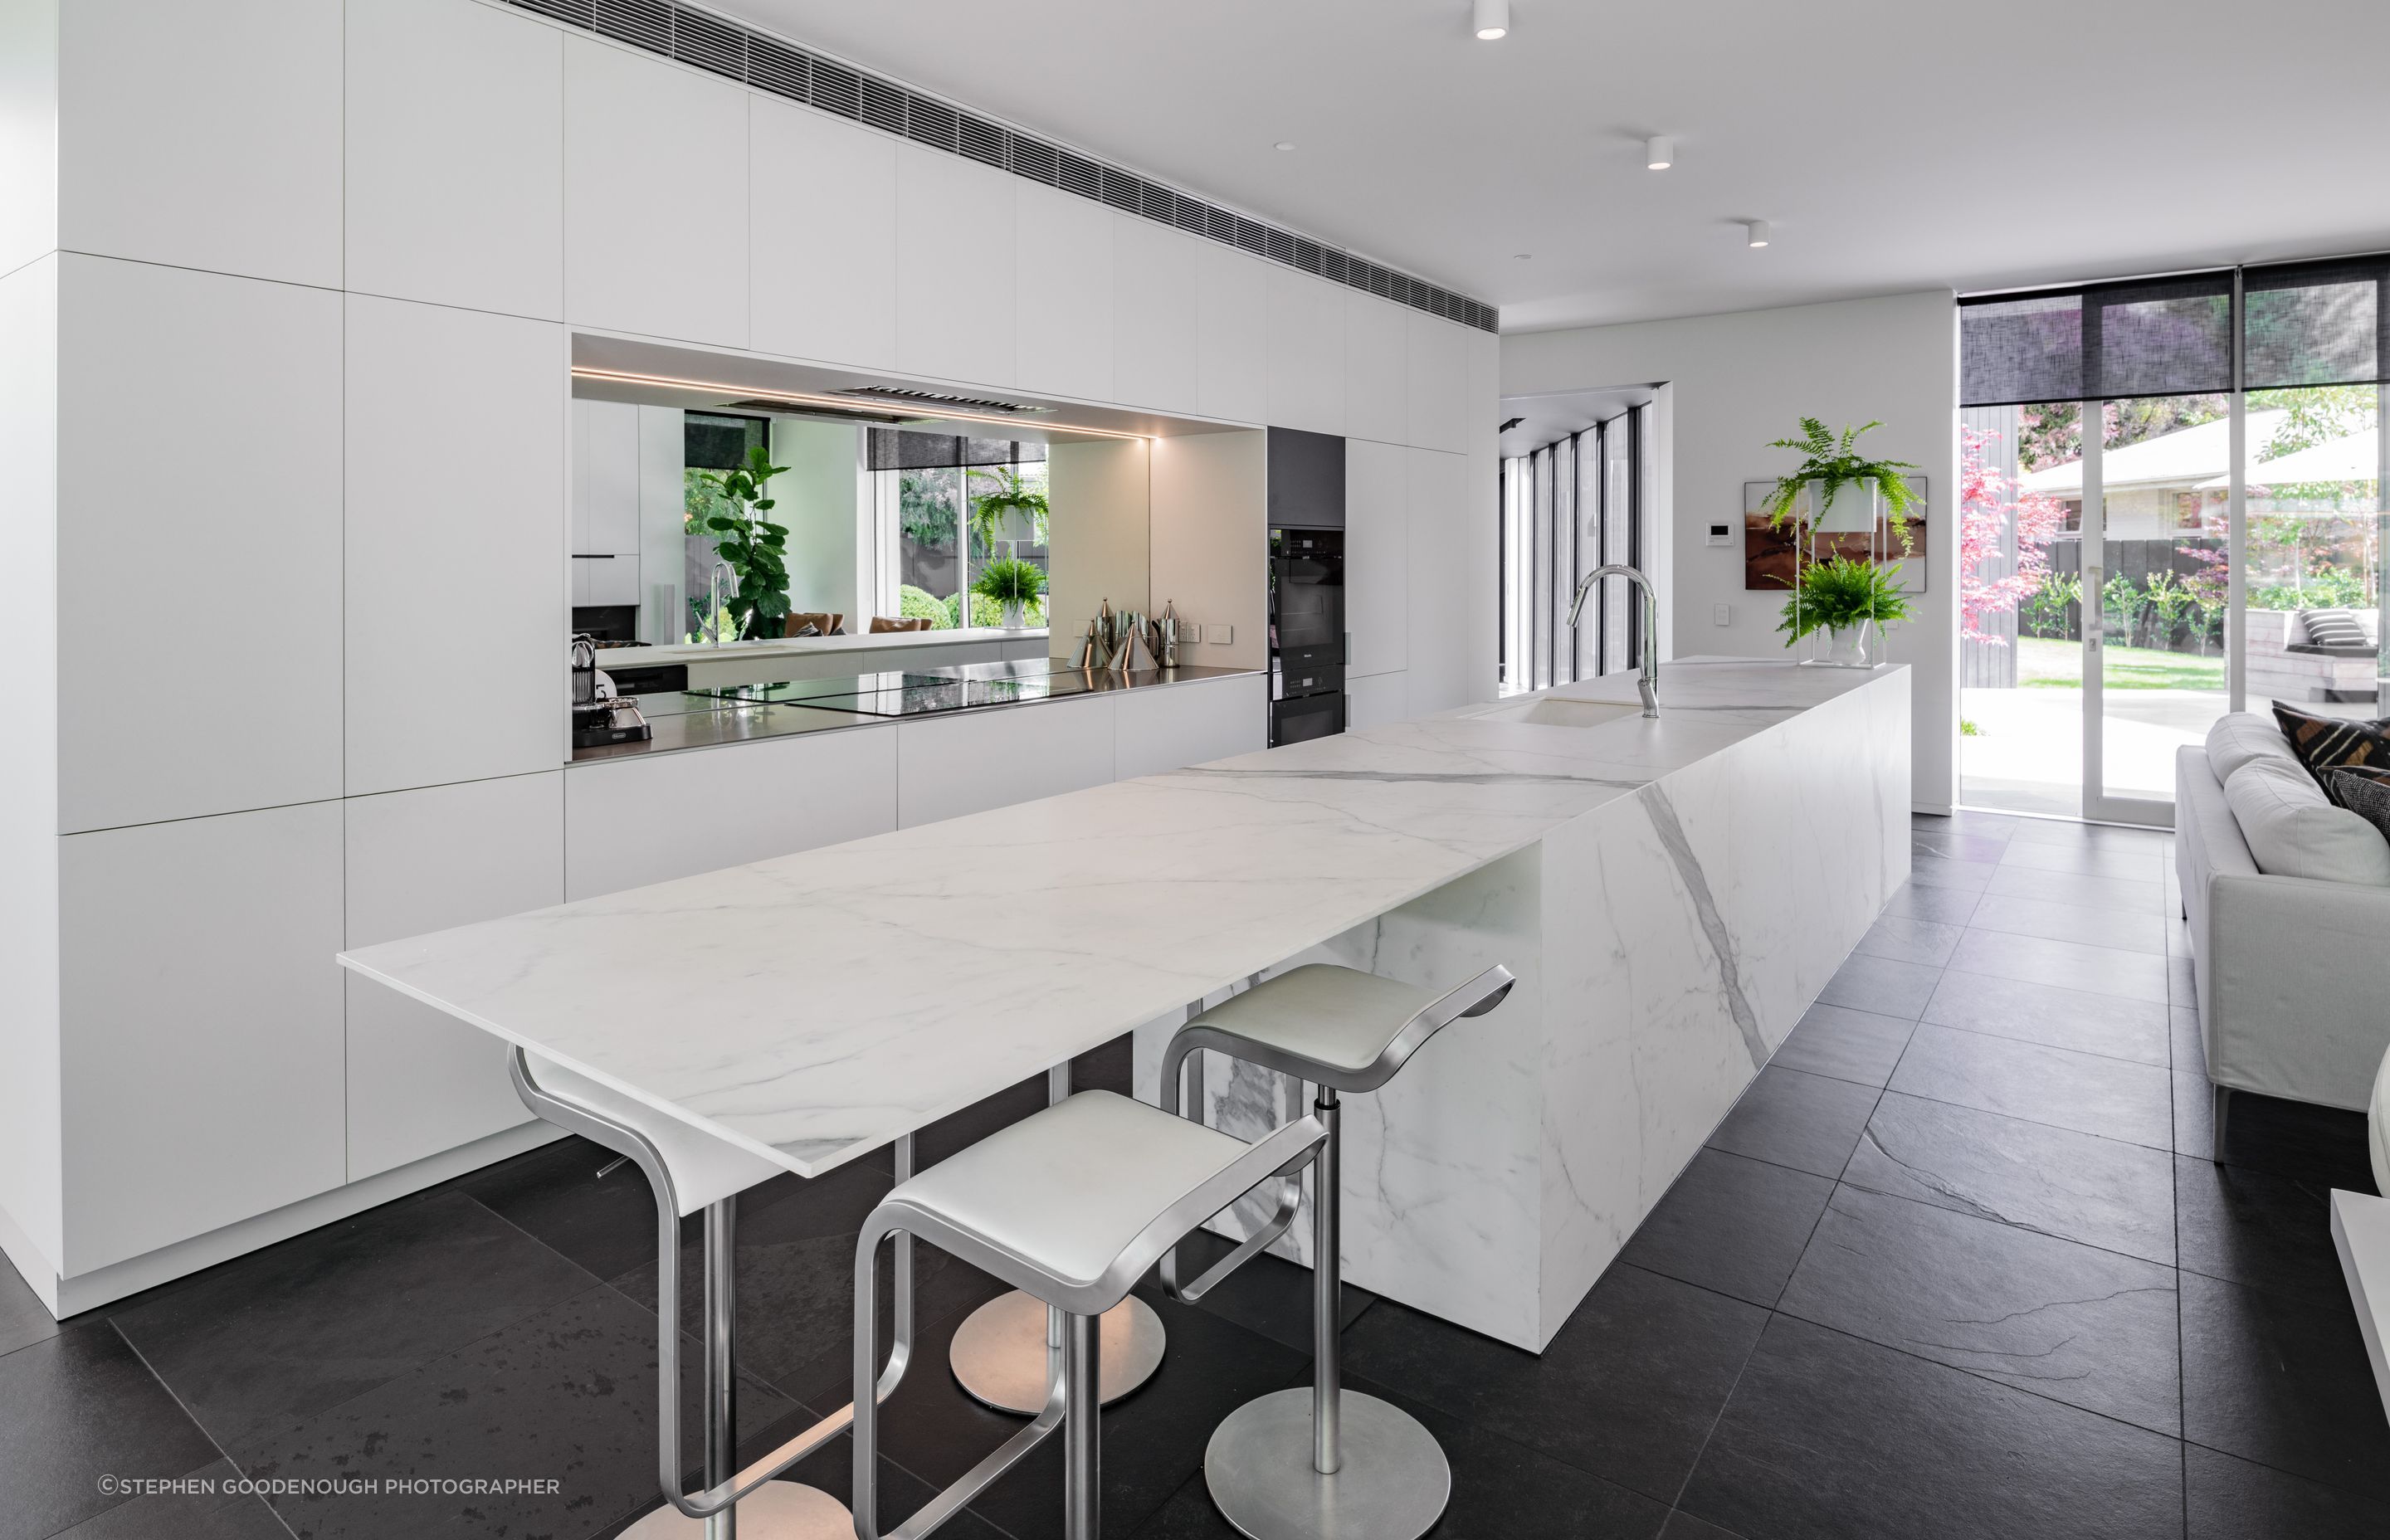 Open and airy, the kitchen features a mirrored splashback.